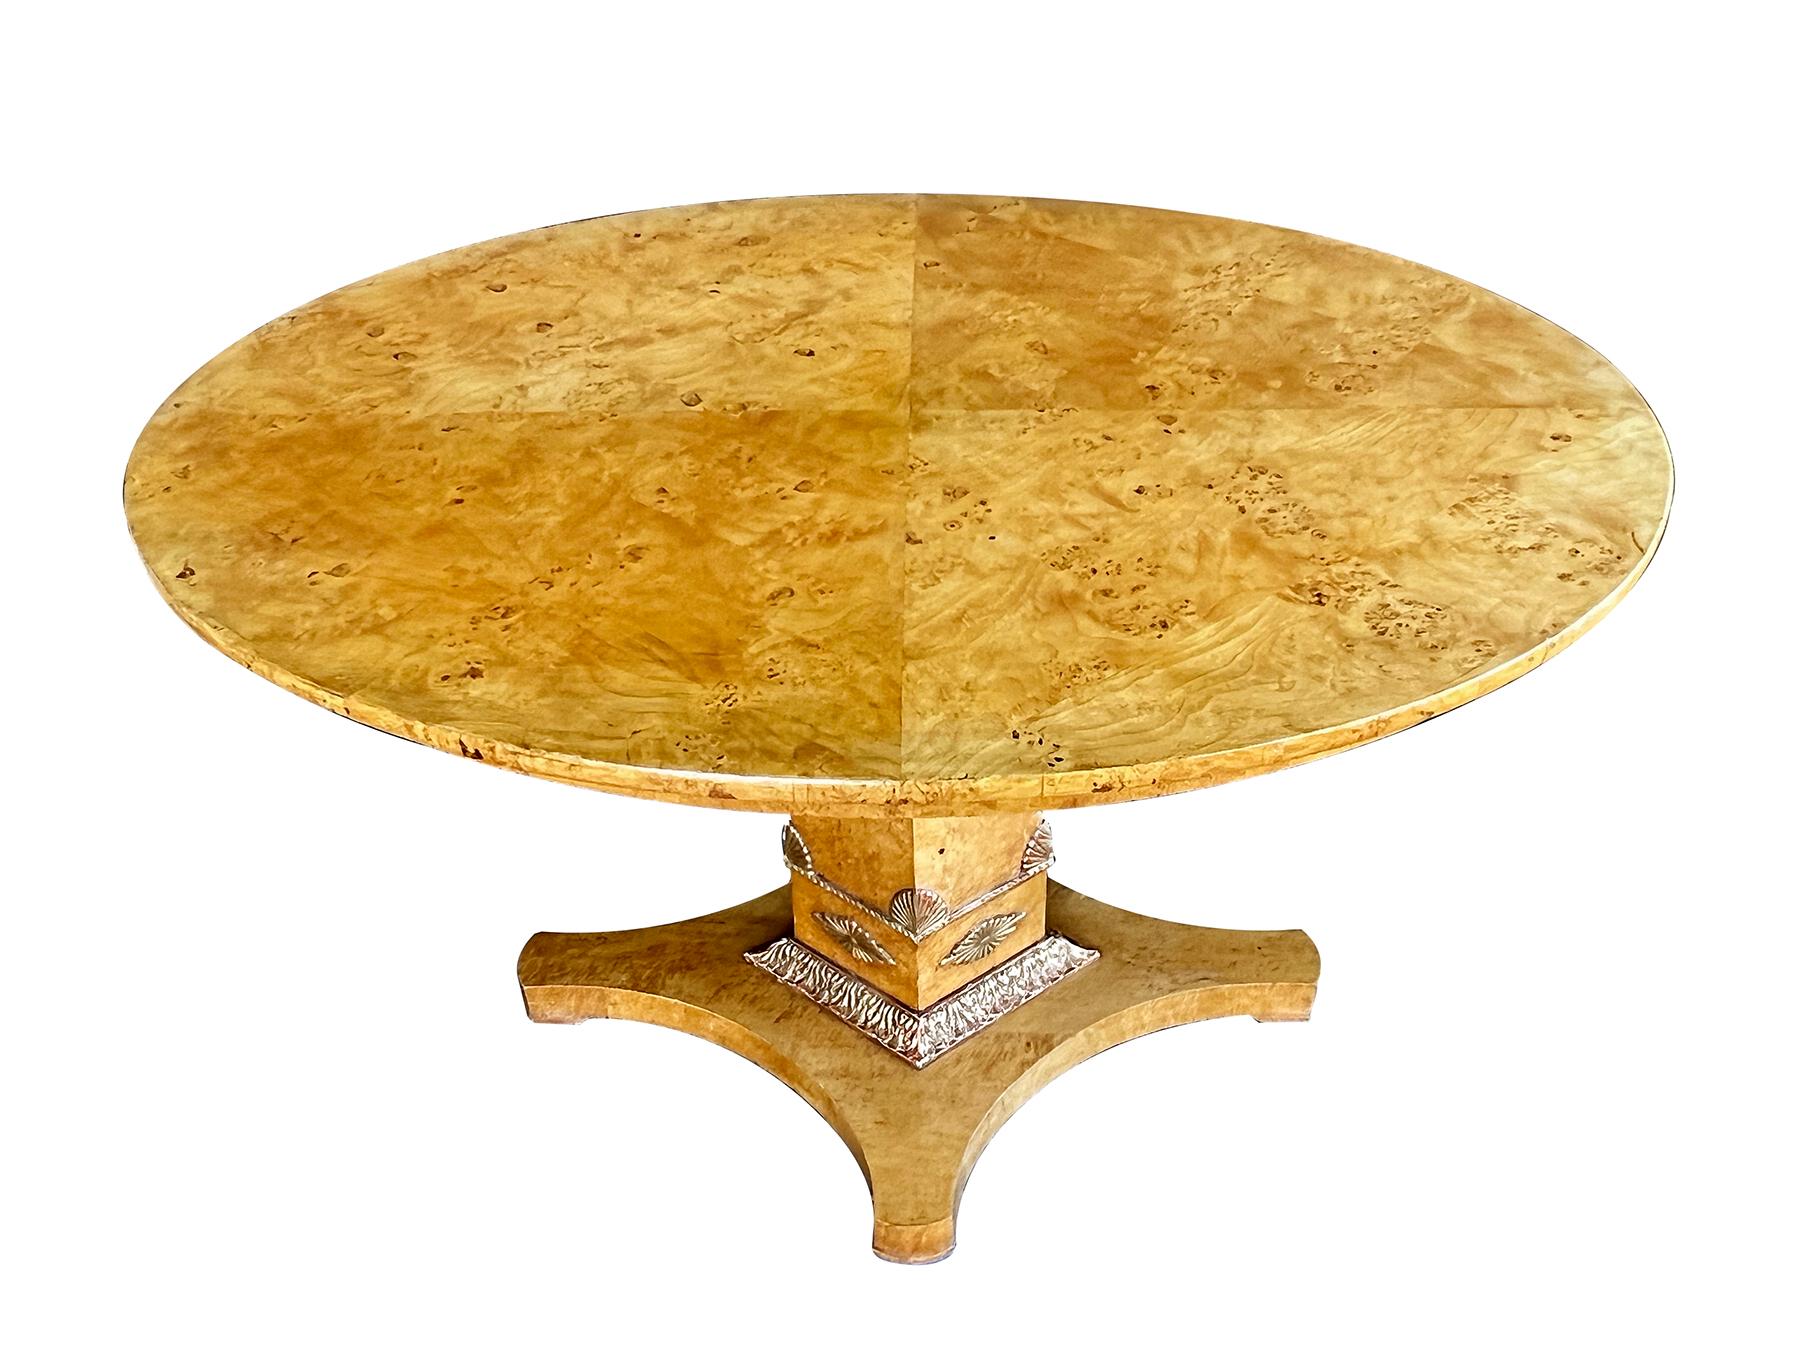 the well-figured quarter-veneered oval top above a plain frieze apron raised on a graduated quadrangular pedestal adorned with giltwood anthemion decoration above a giltwood foliate perimeter band; all resting on a concave quadruped base